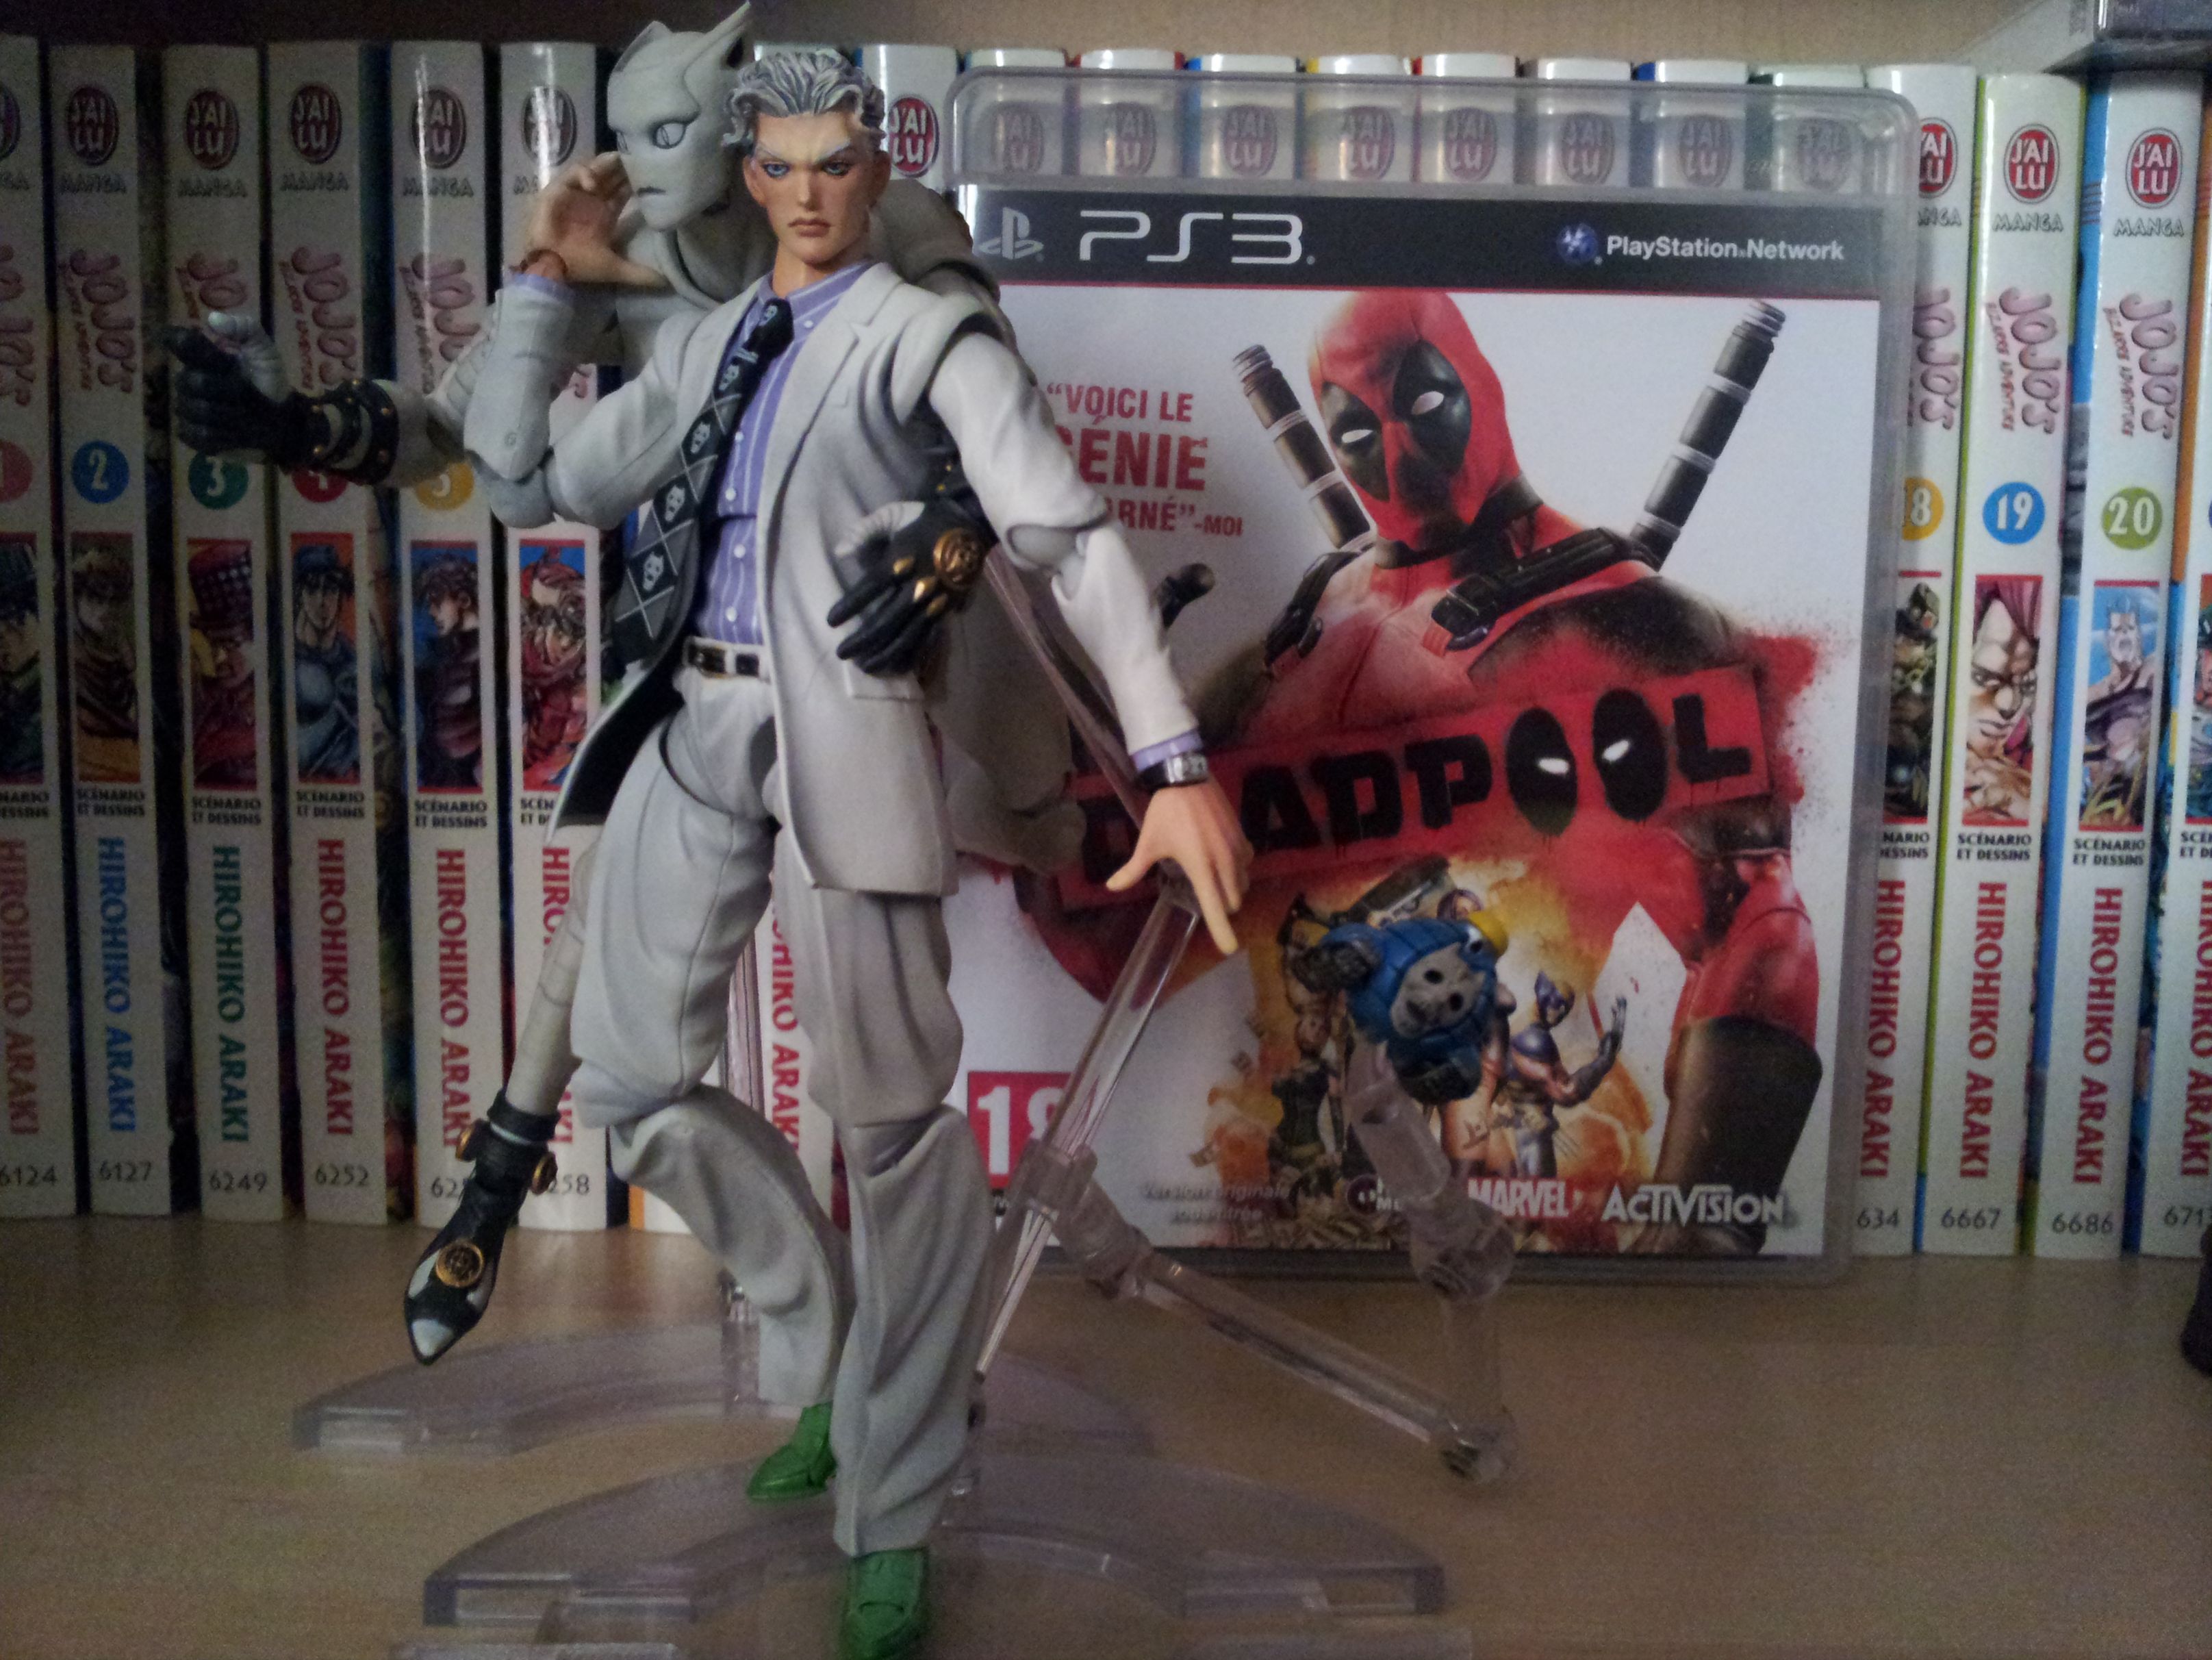 Achat S.A.S Kira Yoshikage Deadpool PS3 Band of Geeks (1)